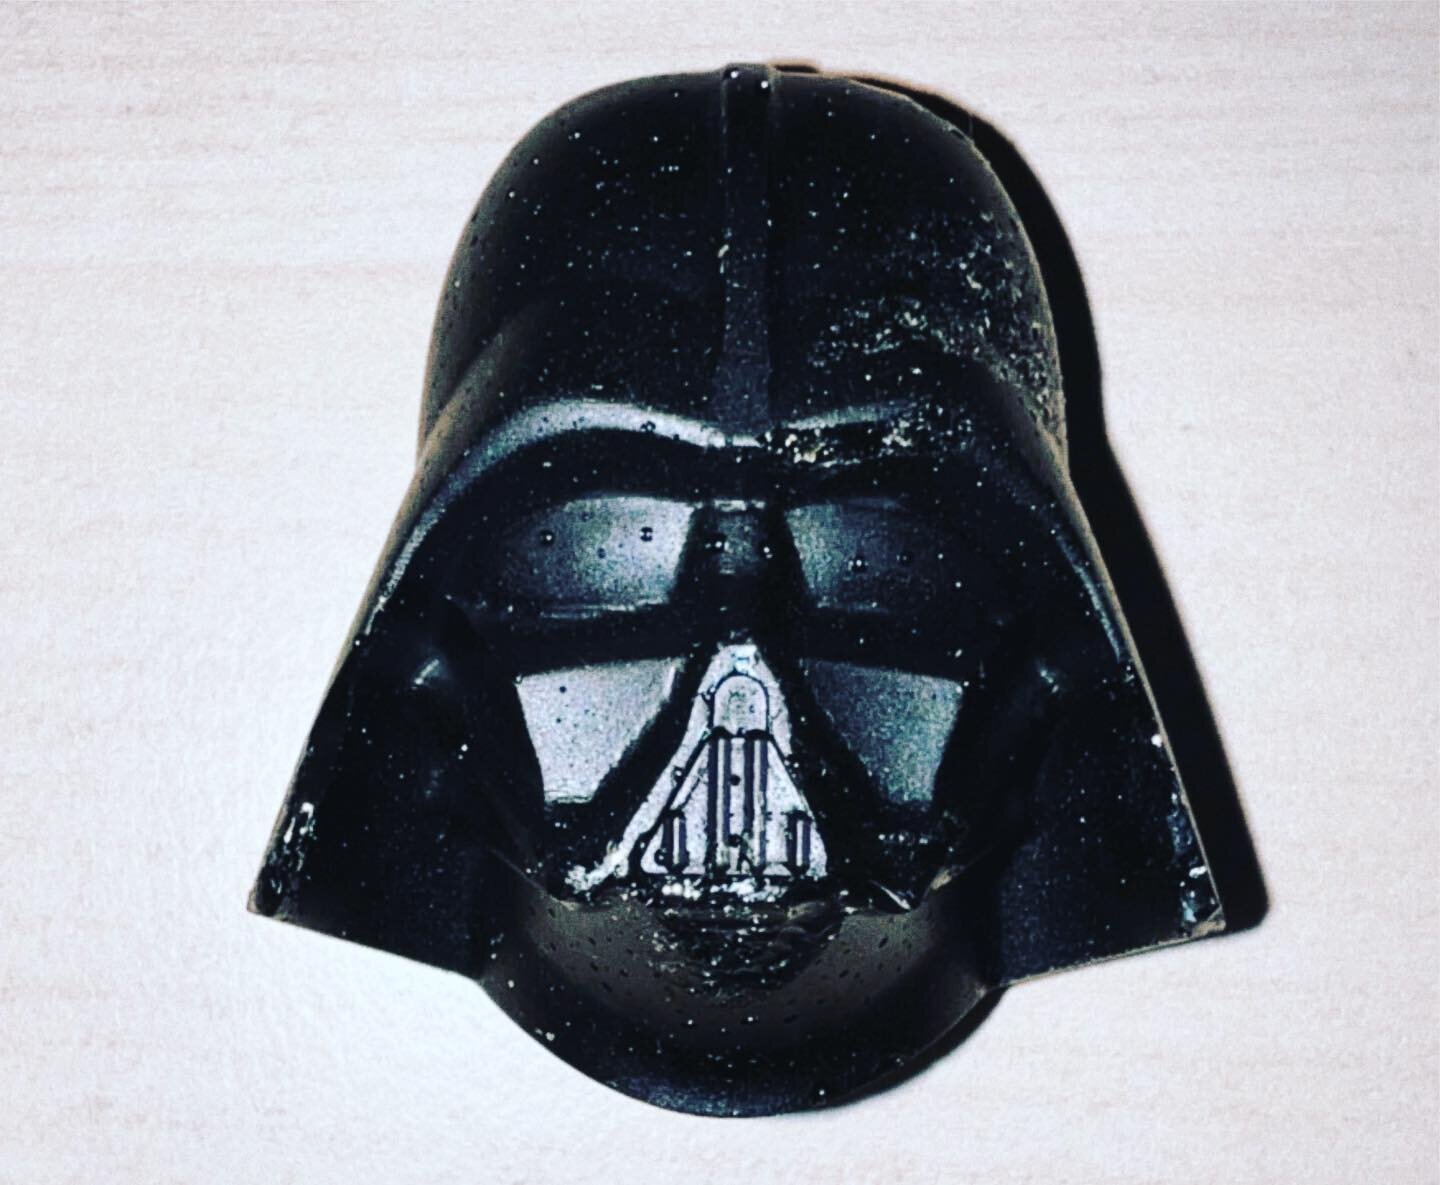 may the fourth be with y&rsquo;all !!!!
#starwars #collection #maythe4thbewithyou #maytheforcebewithyou #may #memories #sf #nyc #bellarosins #fineart #darthvader #dark #light #force